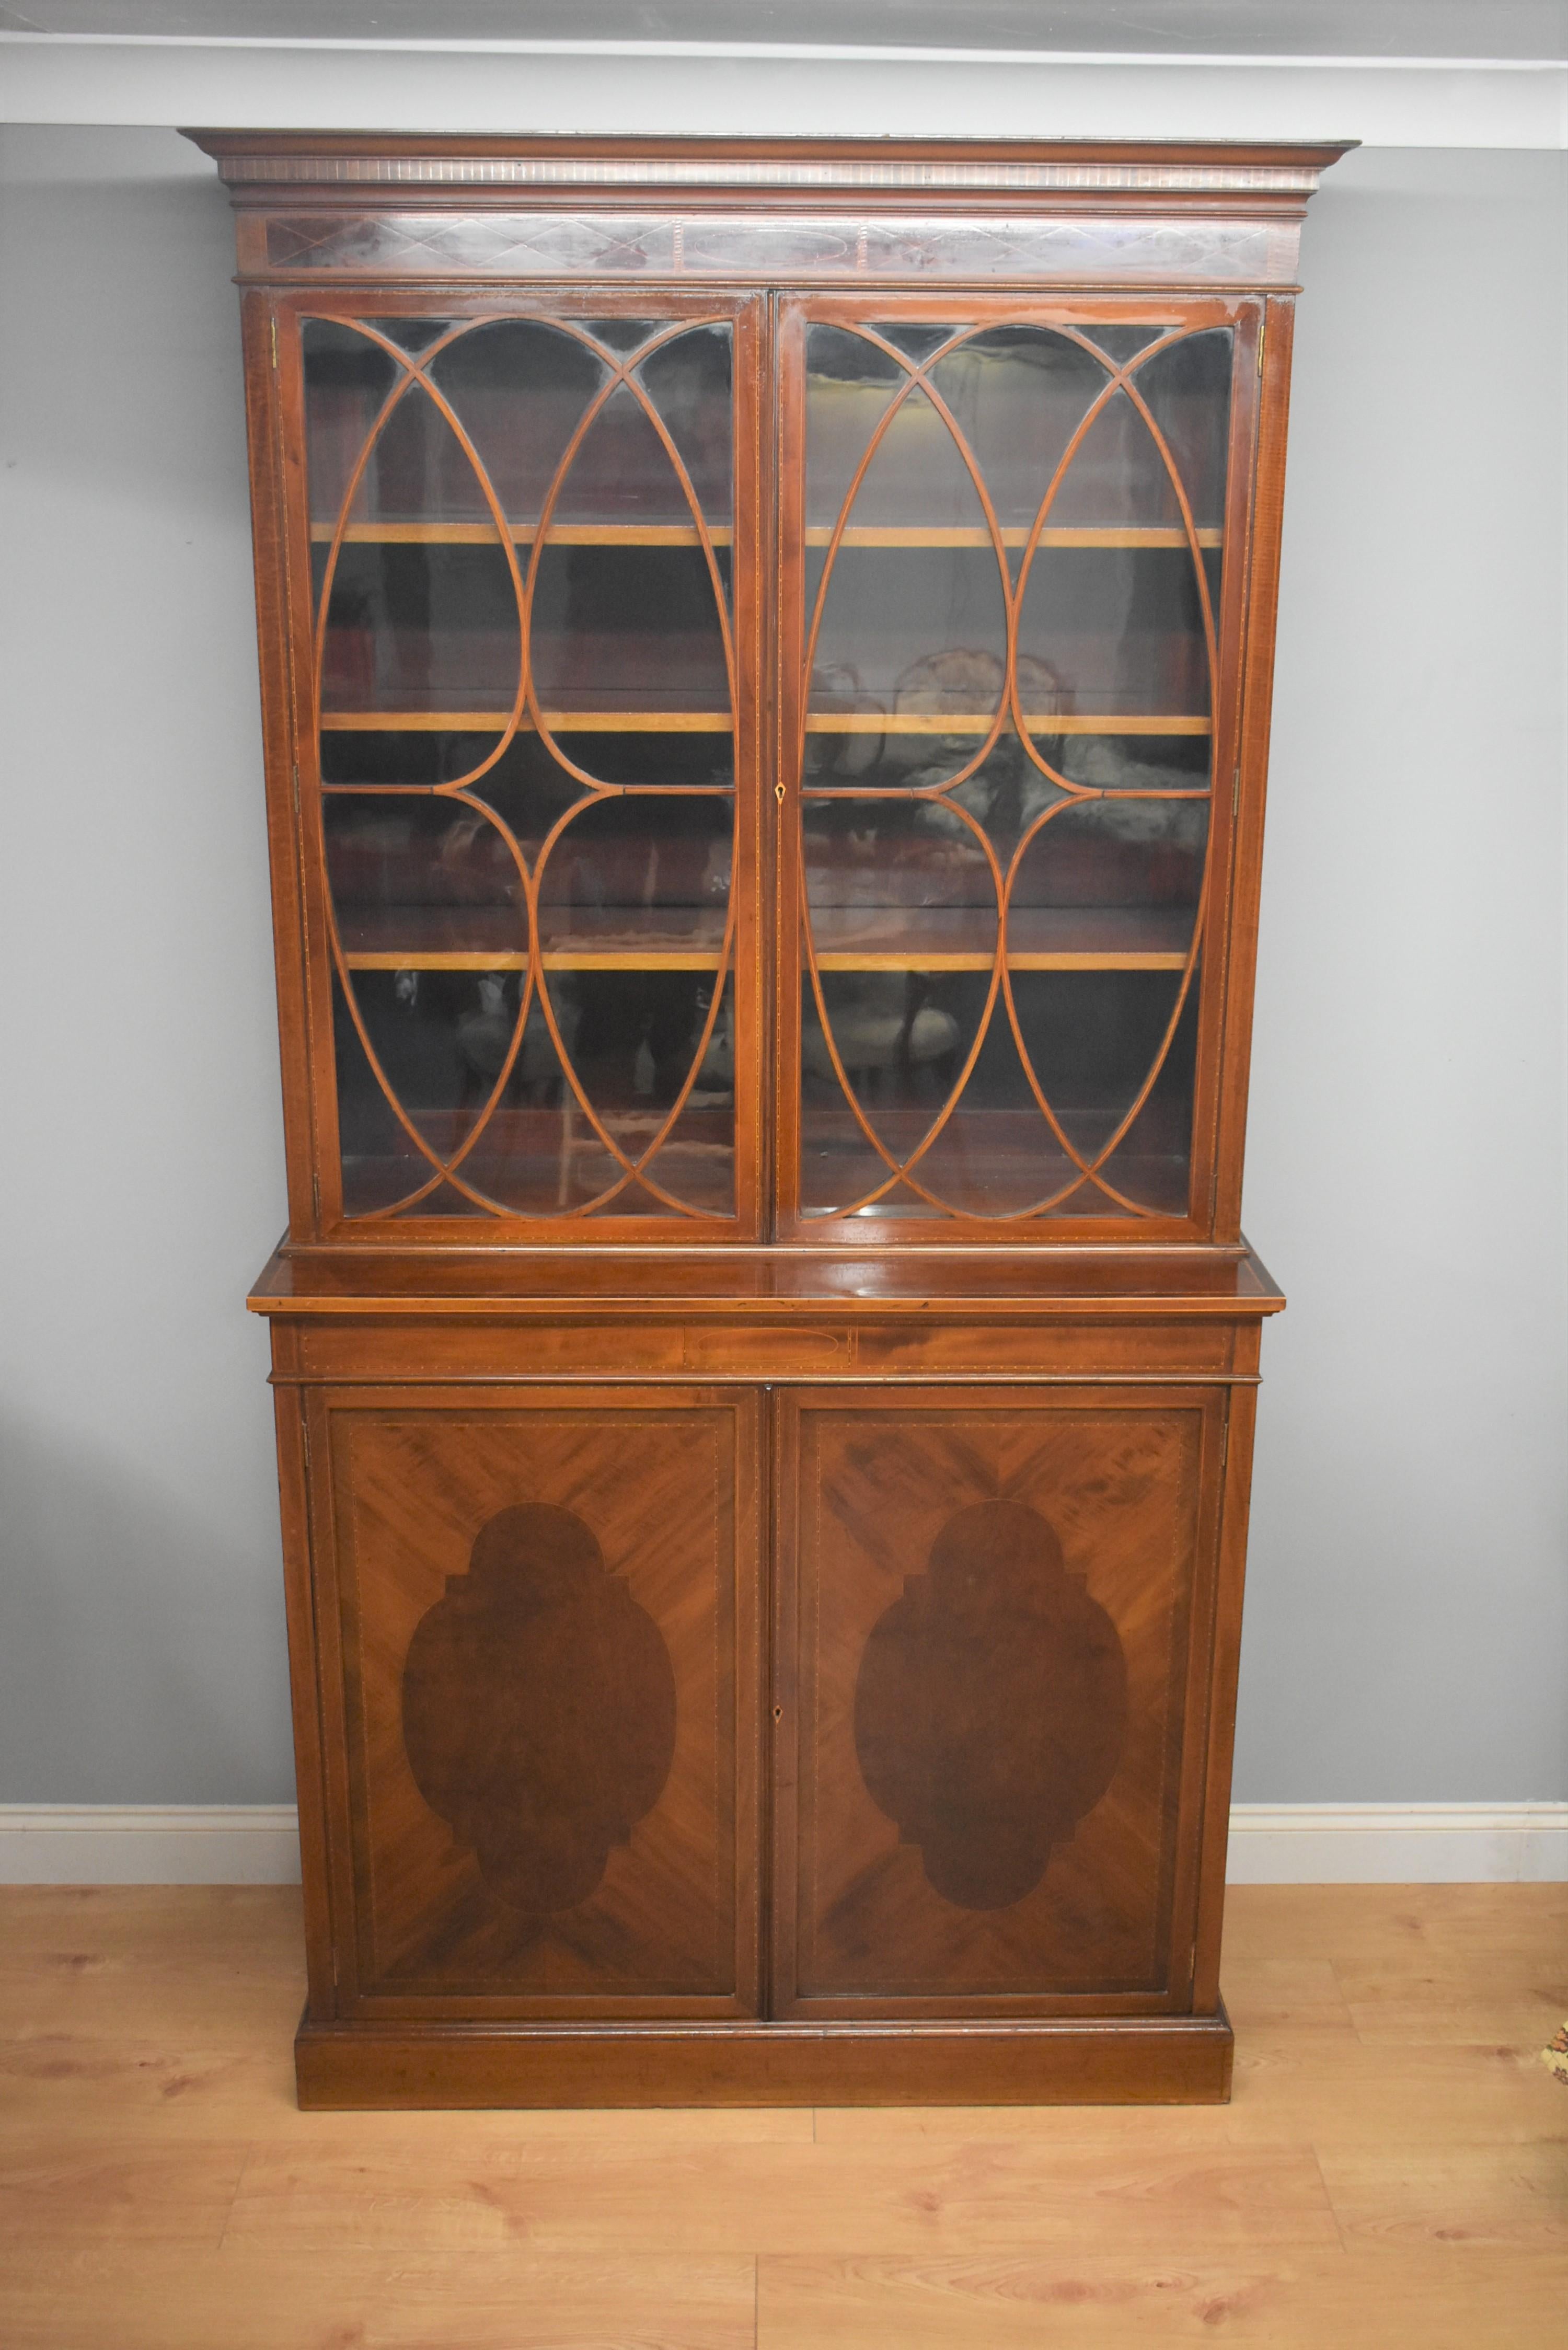 Edwardian mahogany and boxwood line inlaid bookcase, the upper section with adjustable shelves enclosed by astragal glazed doors, the projecting base enclosed by a pair of panelled cupboard doors on a plinth base. In good condition. Dismantles top